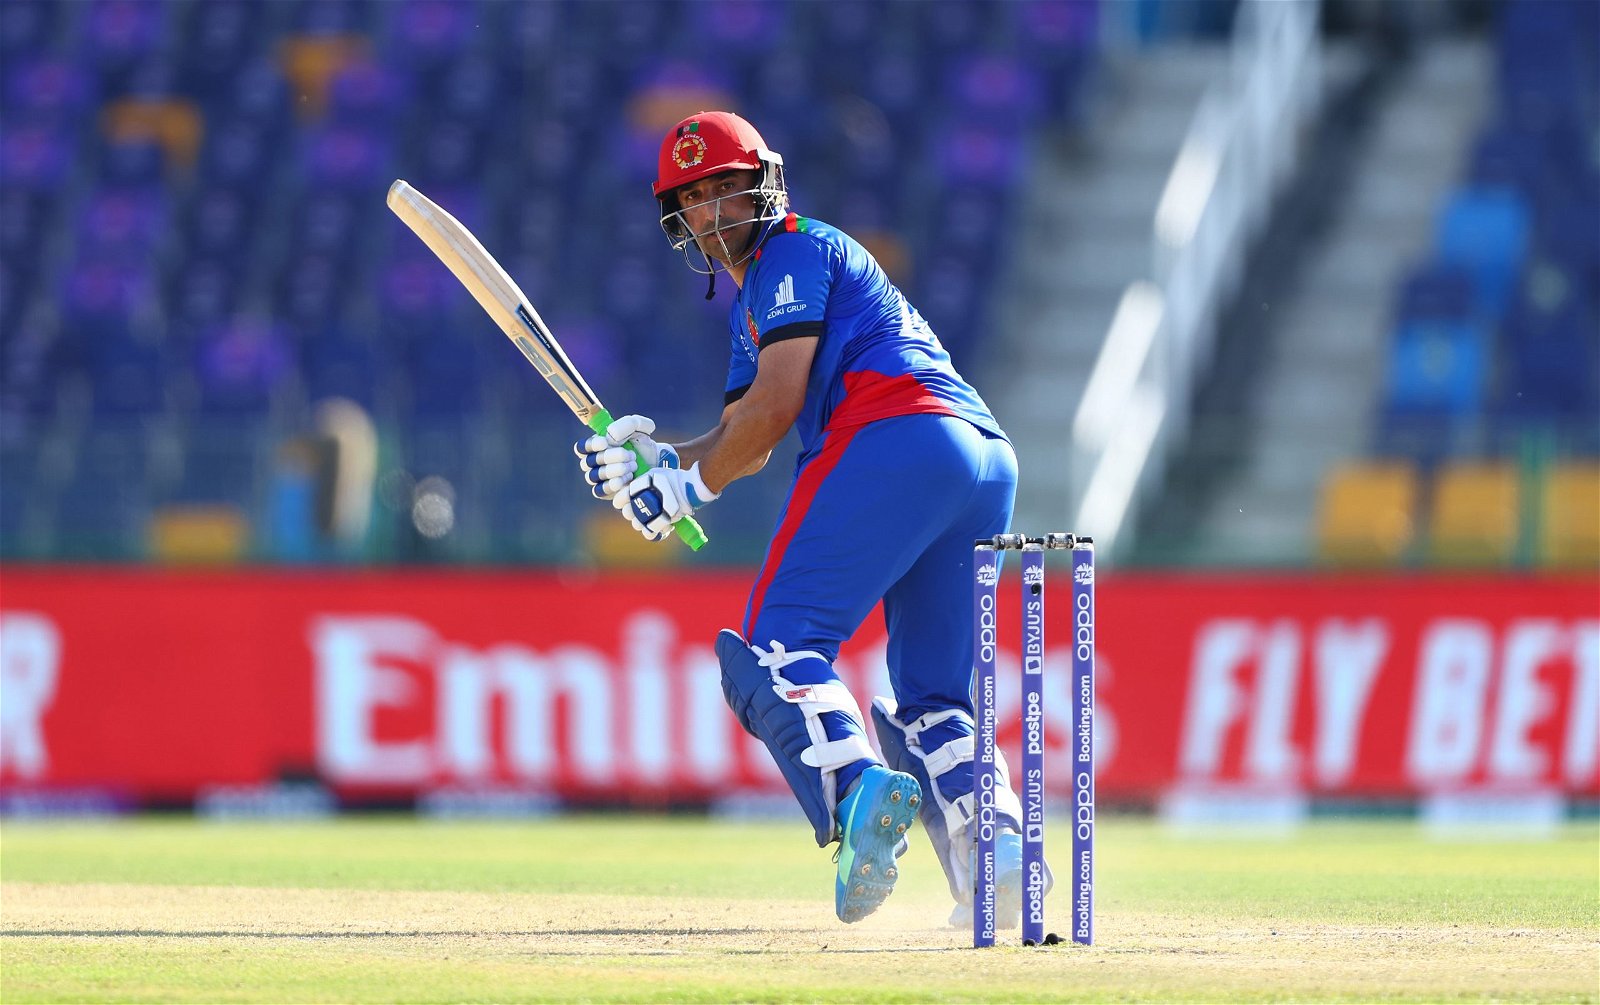 Asghar Afghan bats in international cricket for the last time